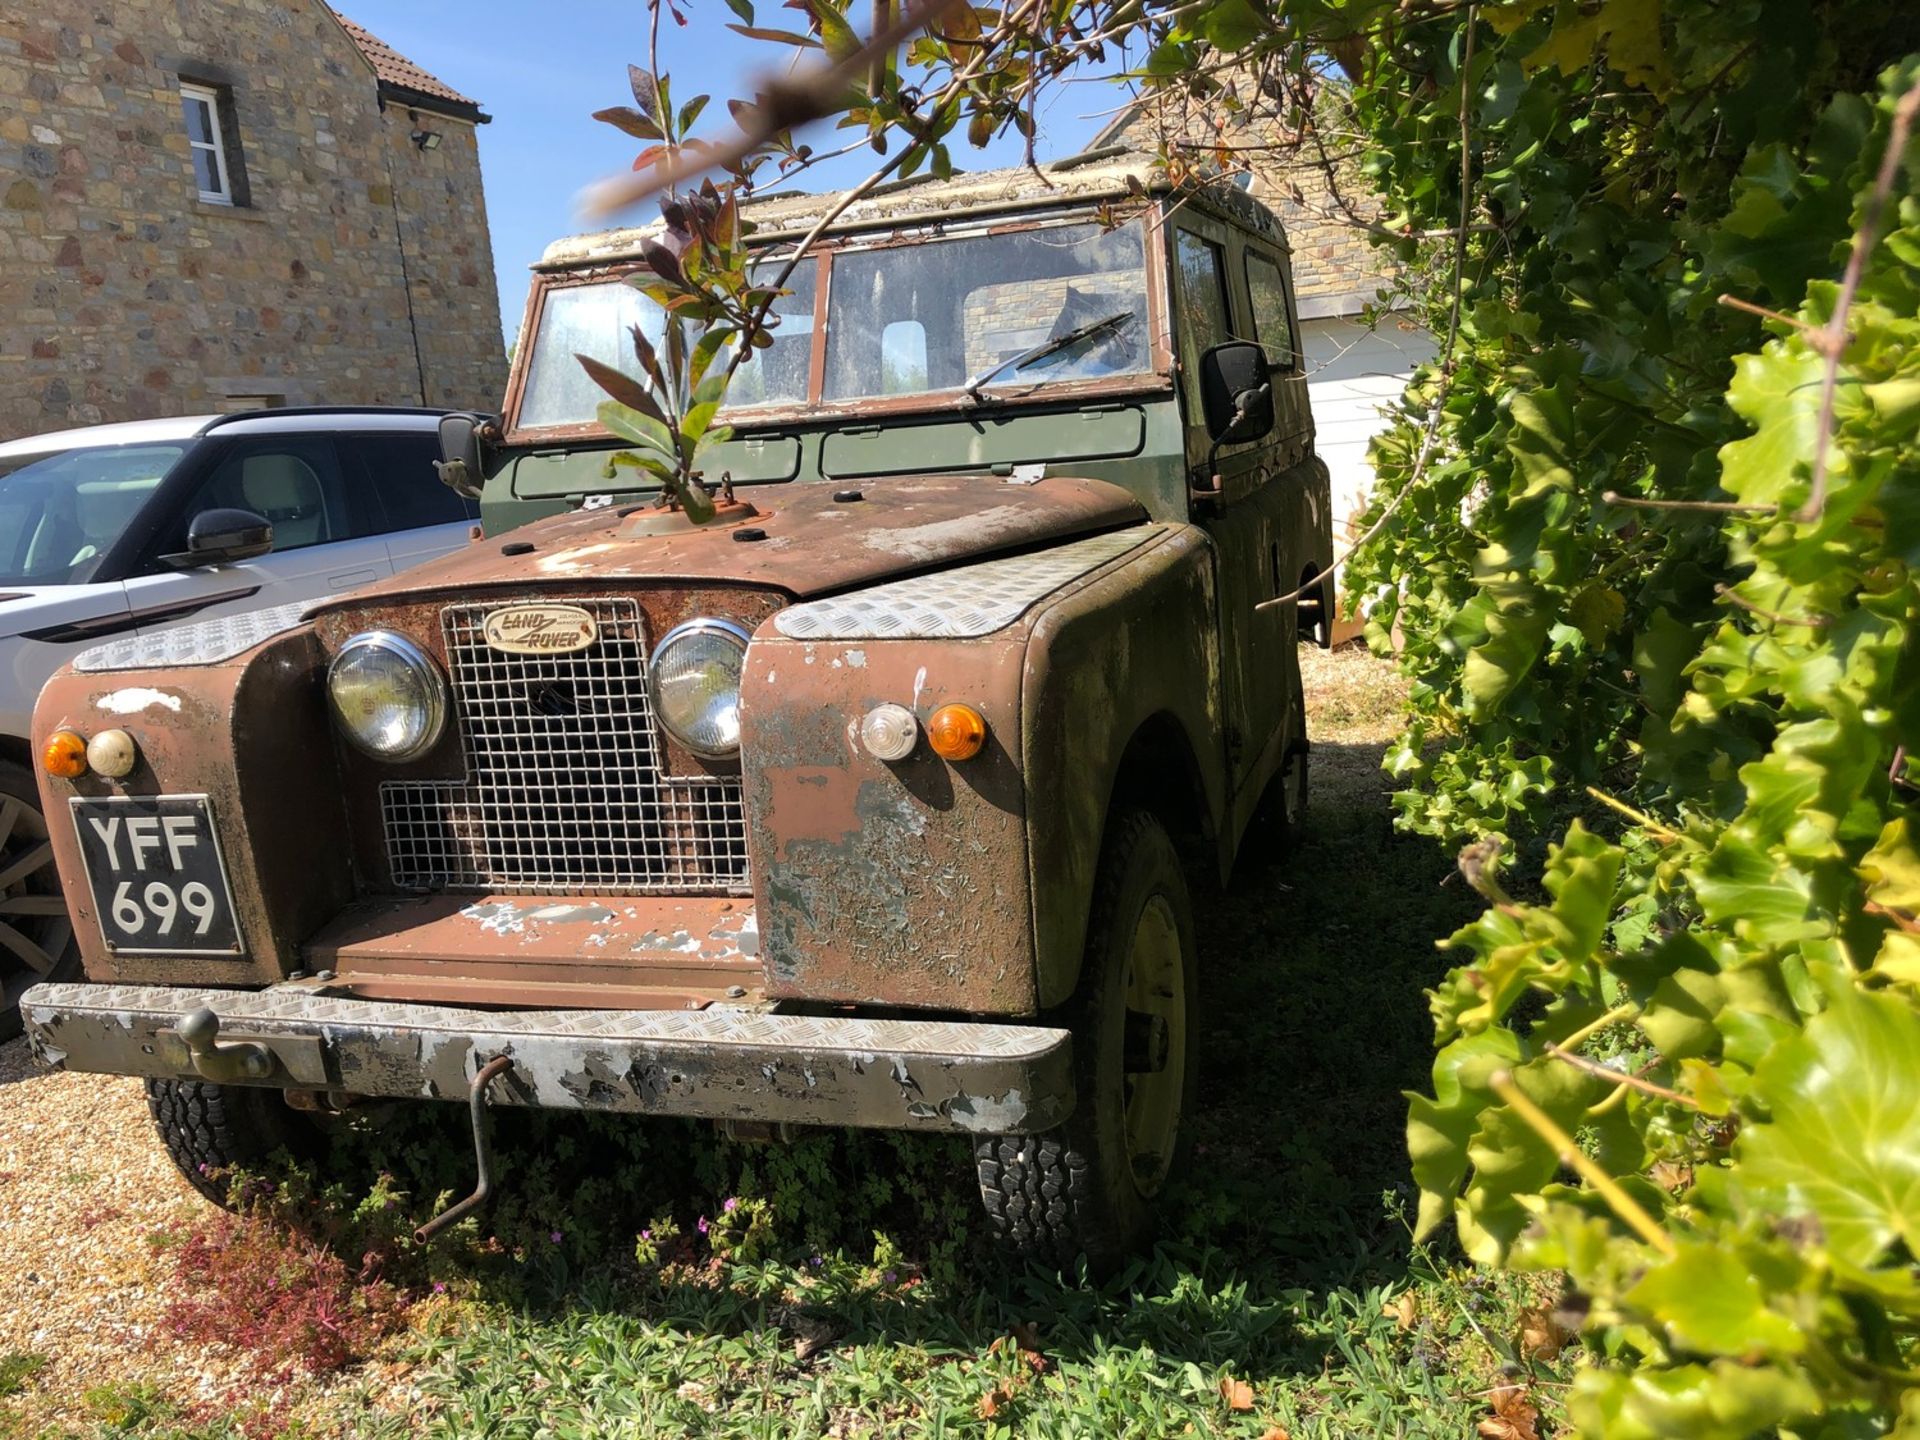 1962 Land Rover Series 2a Registration number YFF 699 Galvanised chassis, good bulkhead and straight - Image 8 of 9